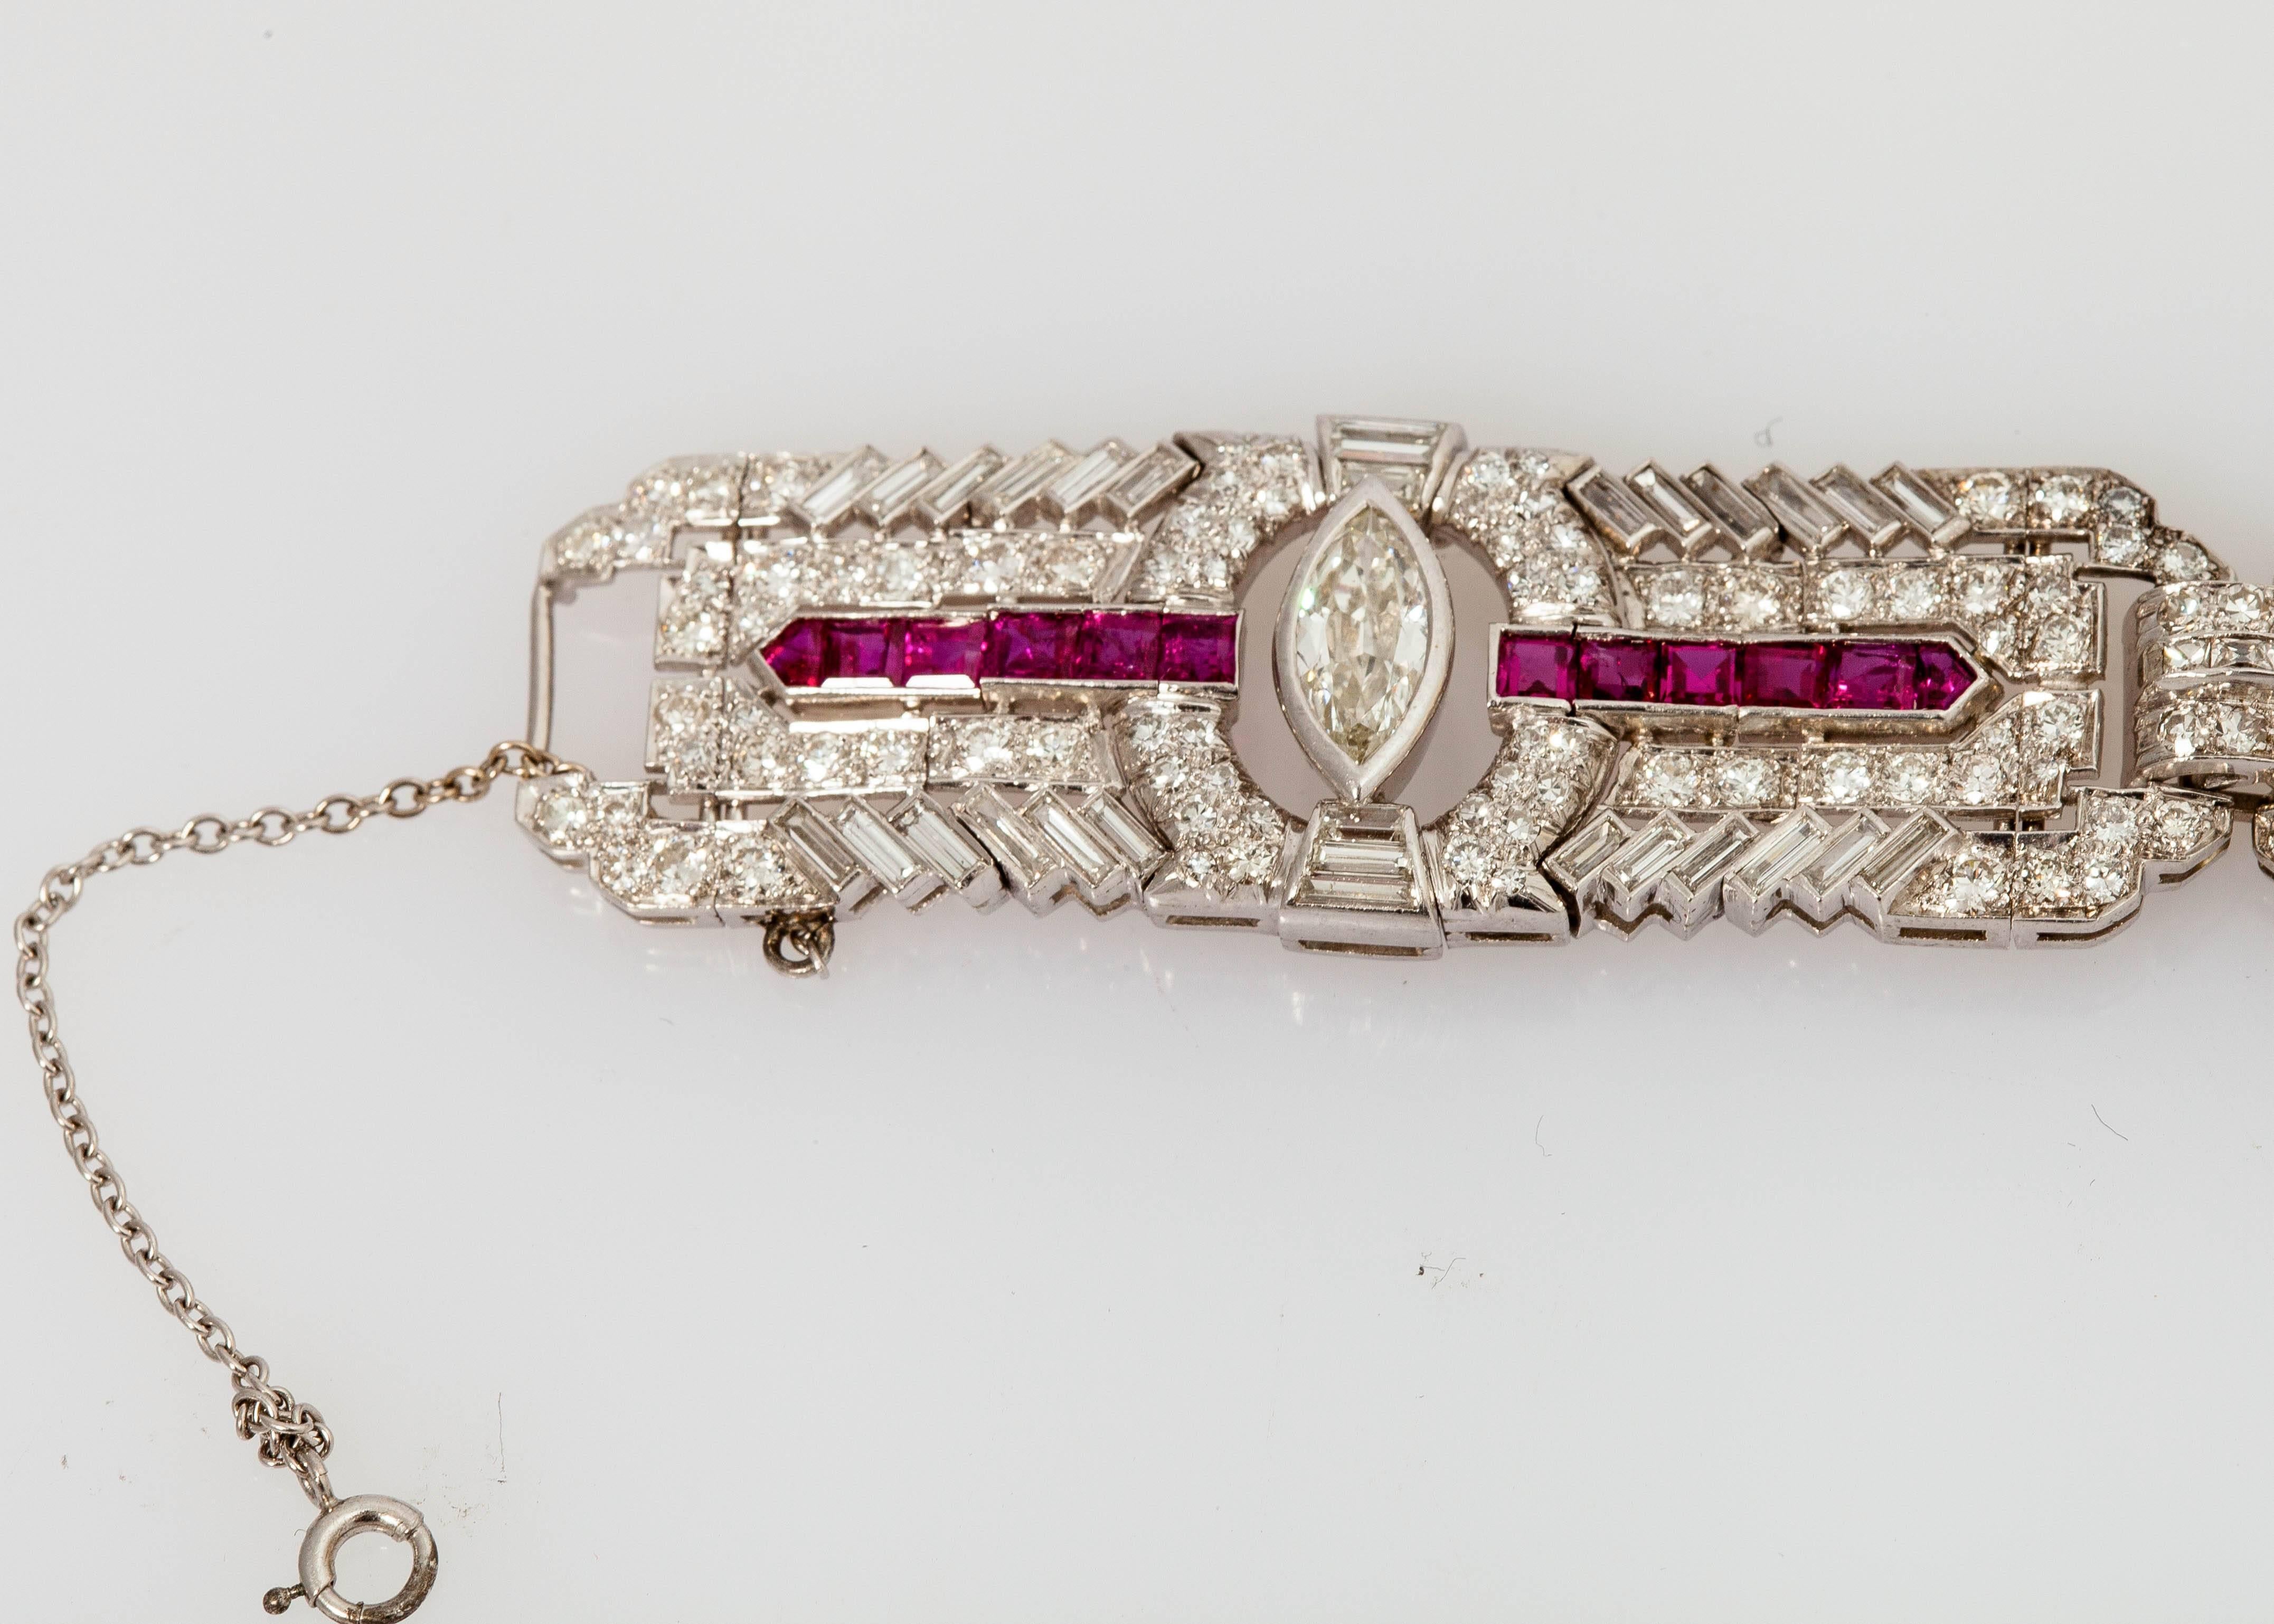 Beautiful Art Deco bracelet finely crafted in platinum, with rubies weighing approx.9.00 carats and a mix of cut diamonds: Marquise cut weighing $ 4.25 carats, round cut weighing 13.00 carats and baguette cut weighing 7.00 carats.